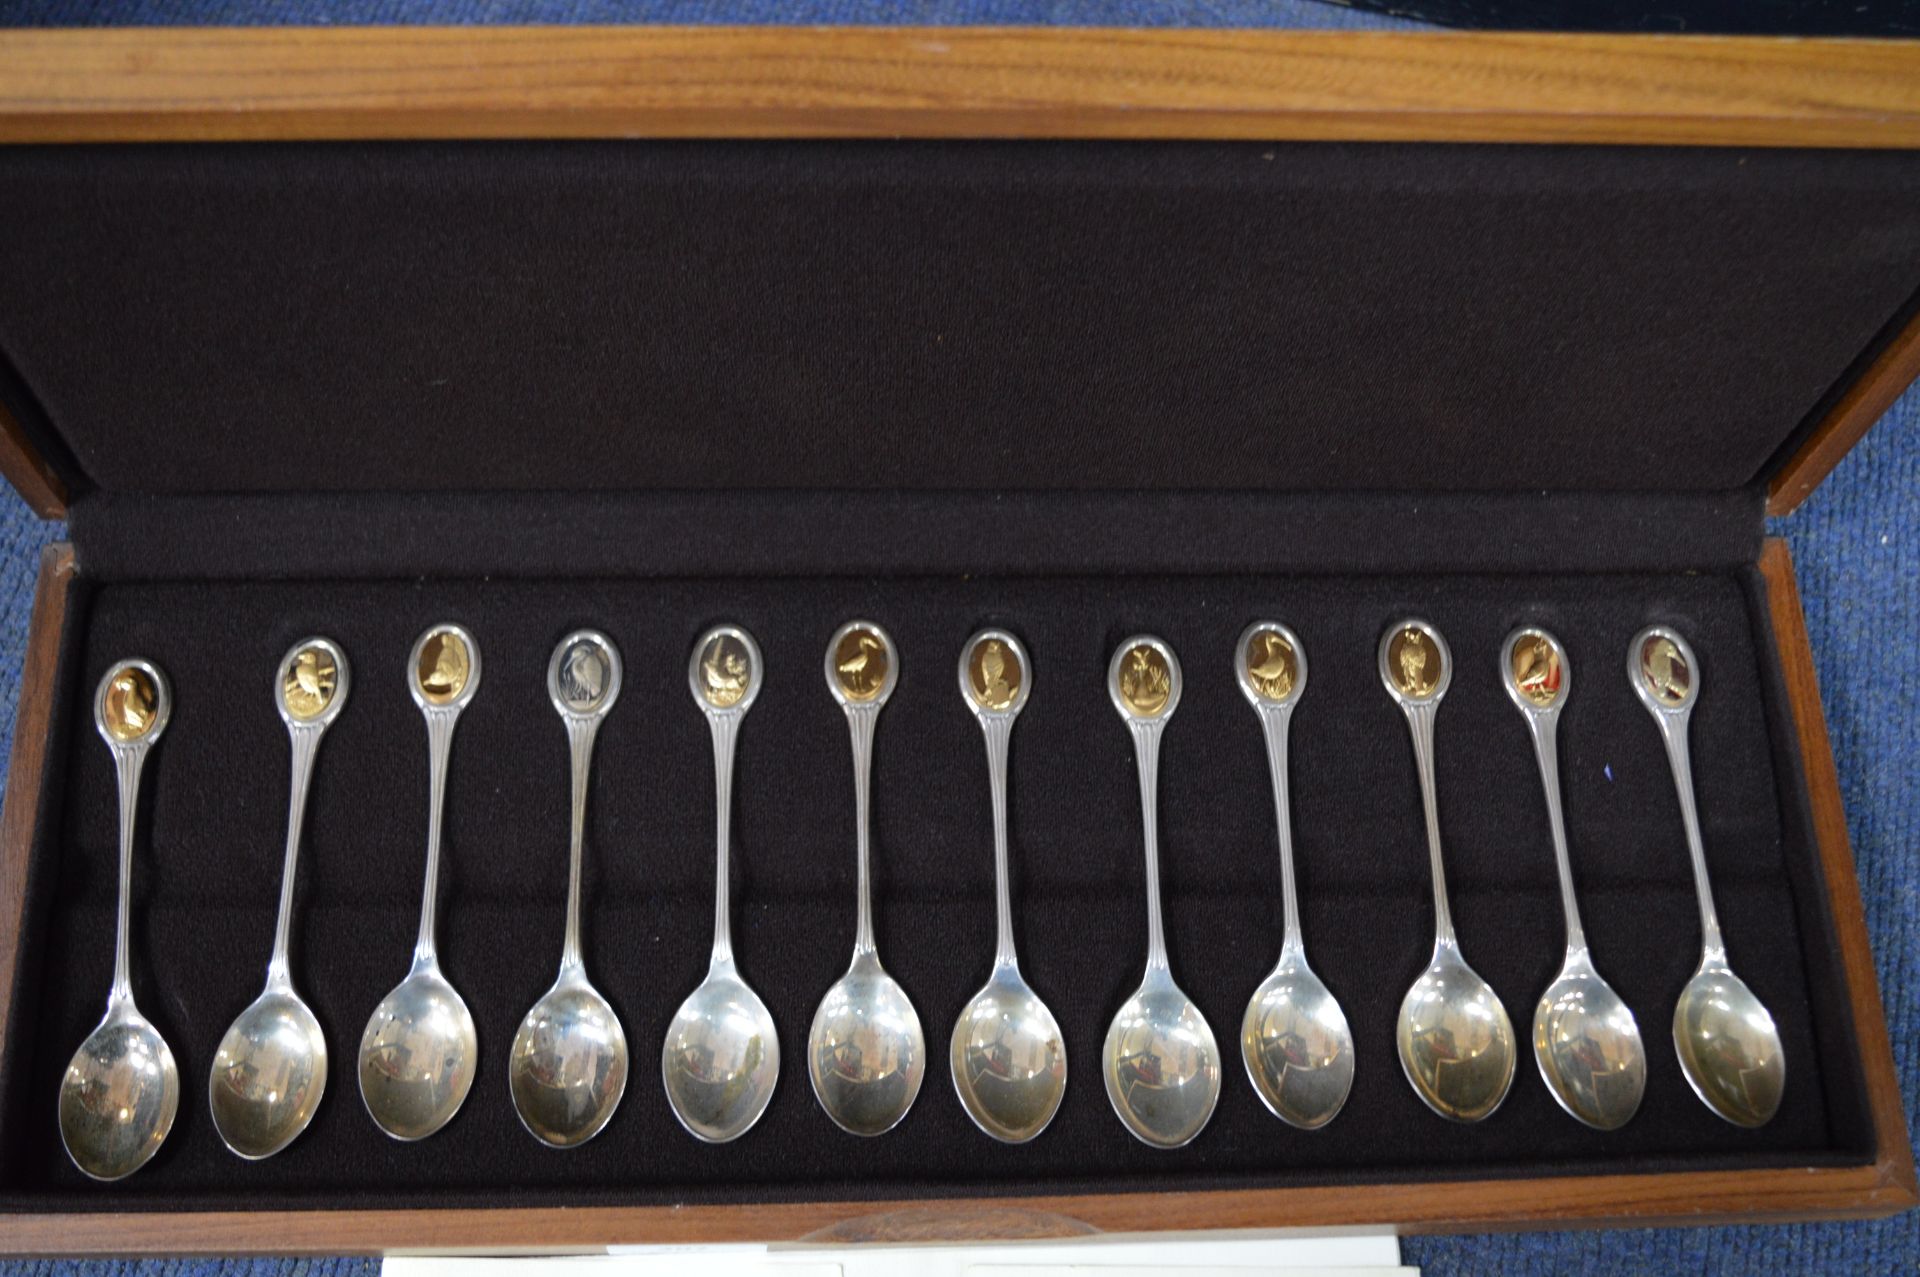 RSPB Hallmarked Silver Spoon Collection